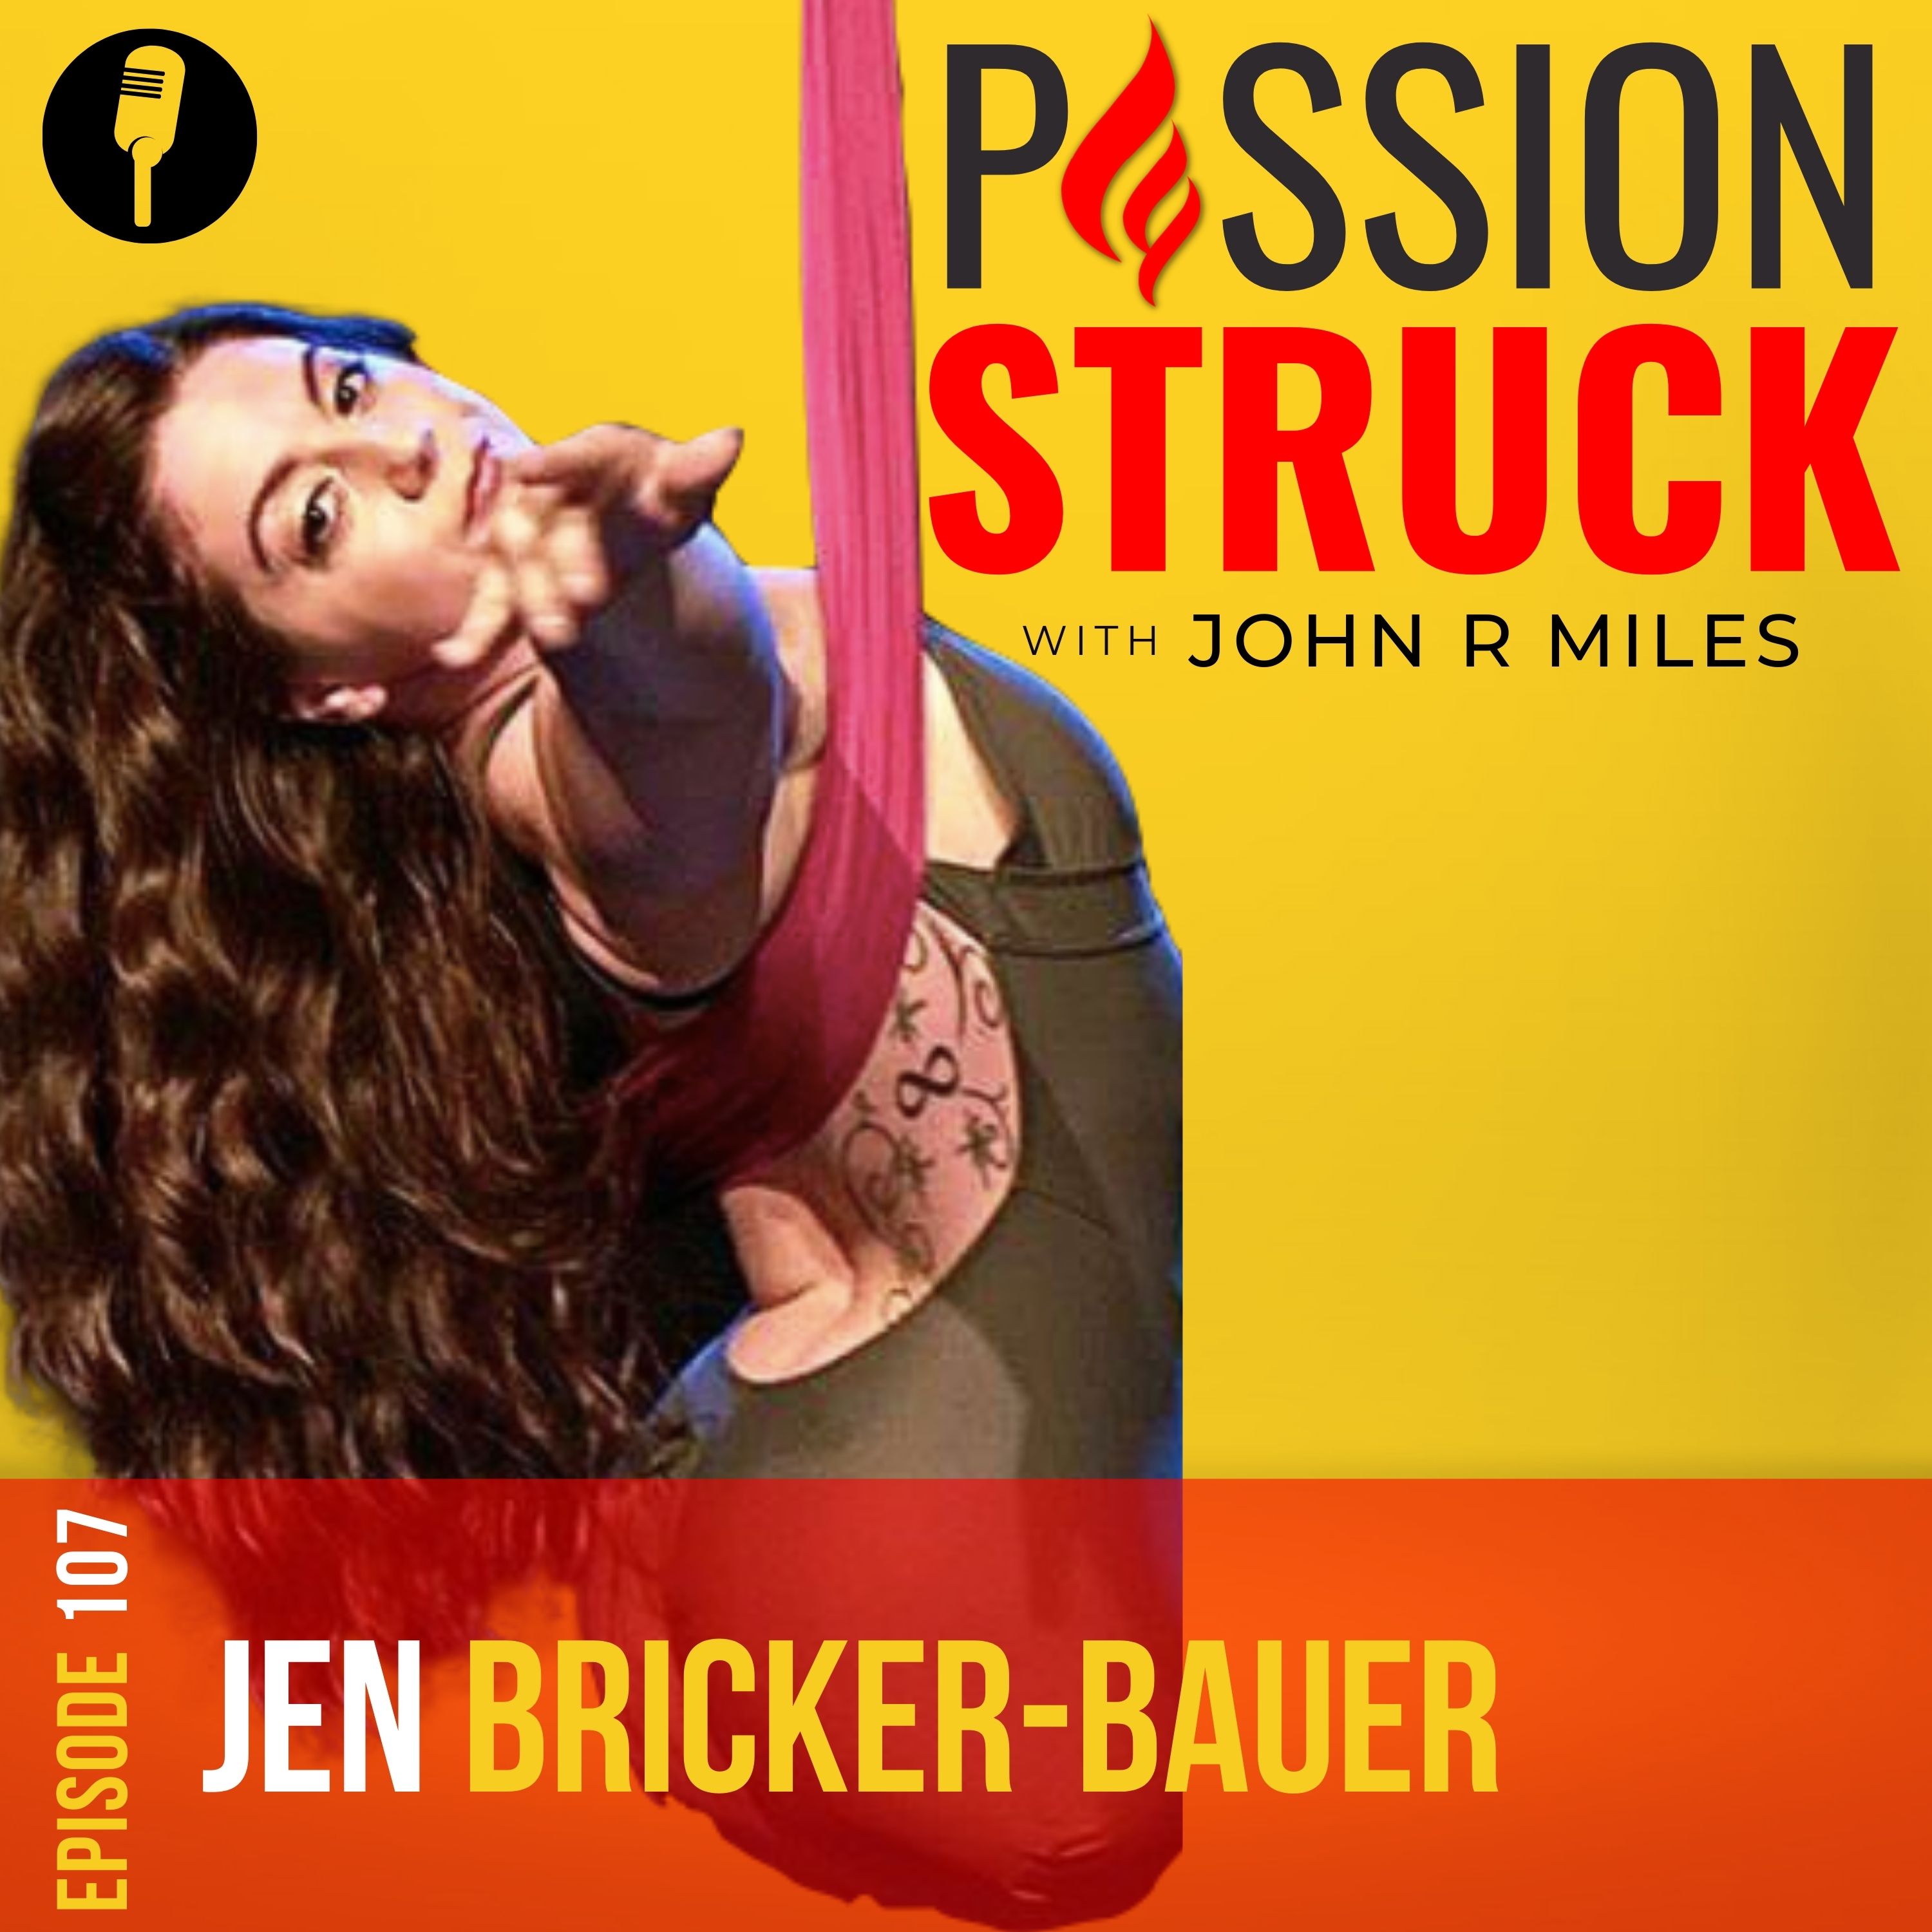 Jen Bricker-Bauer picture for the passion struck podcast performing arial stunt